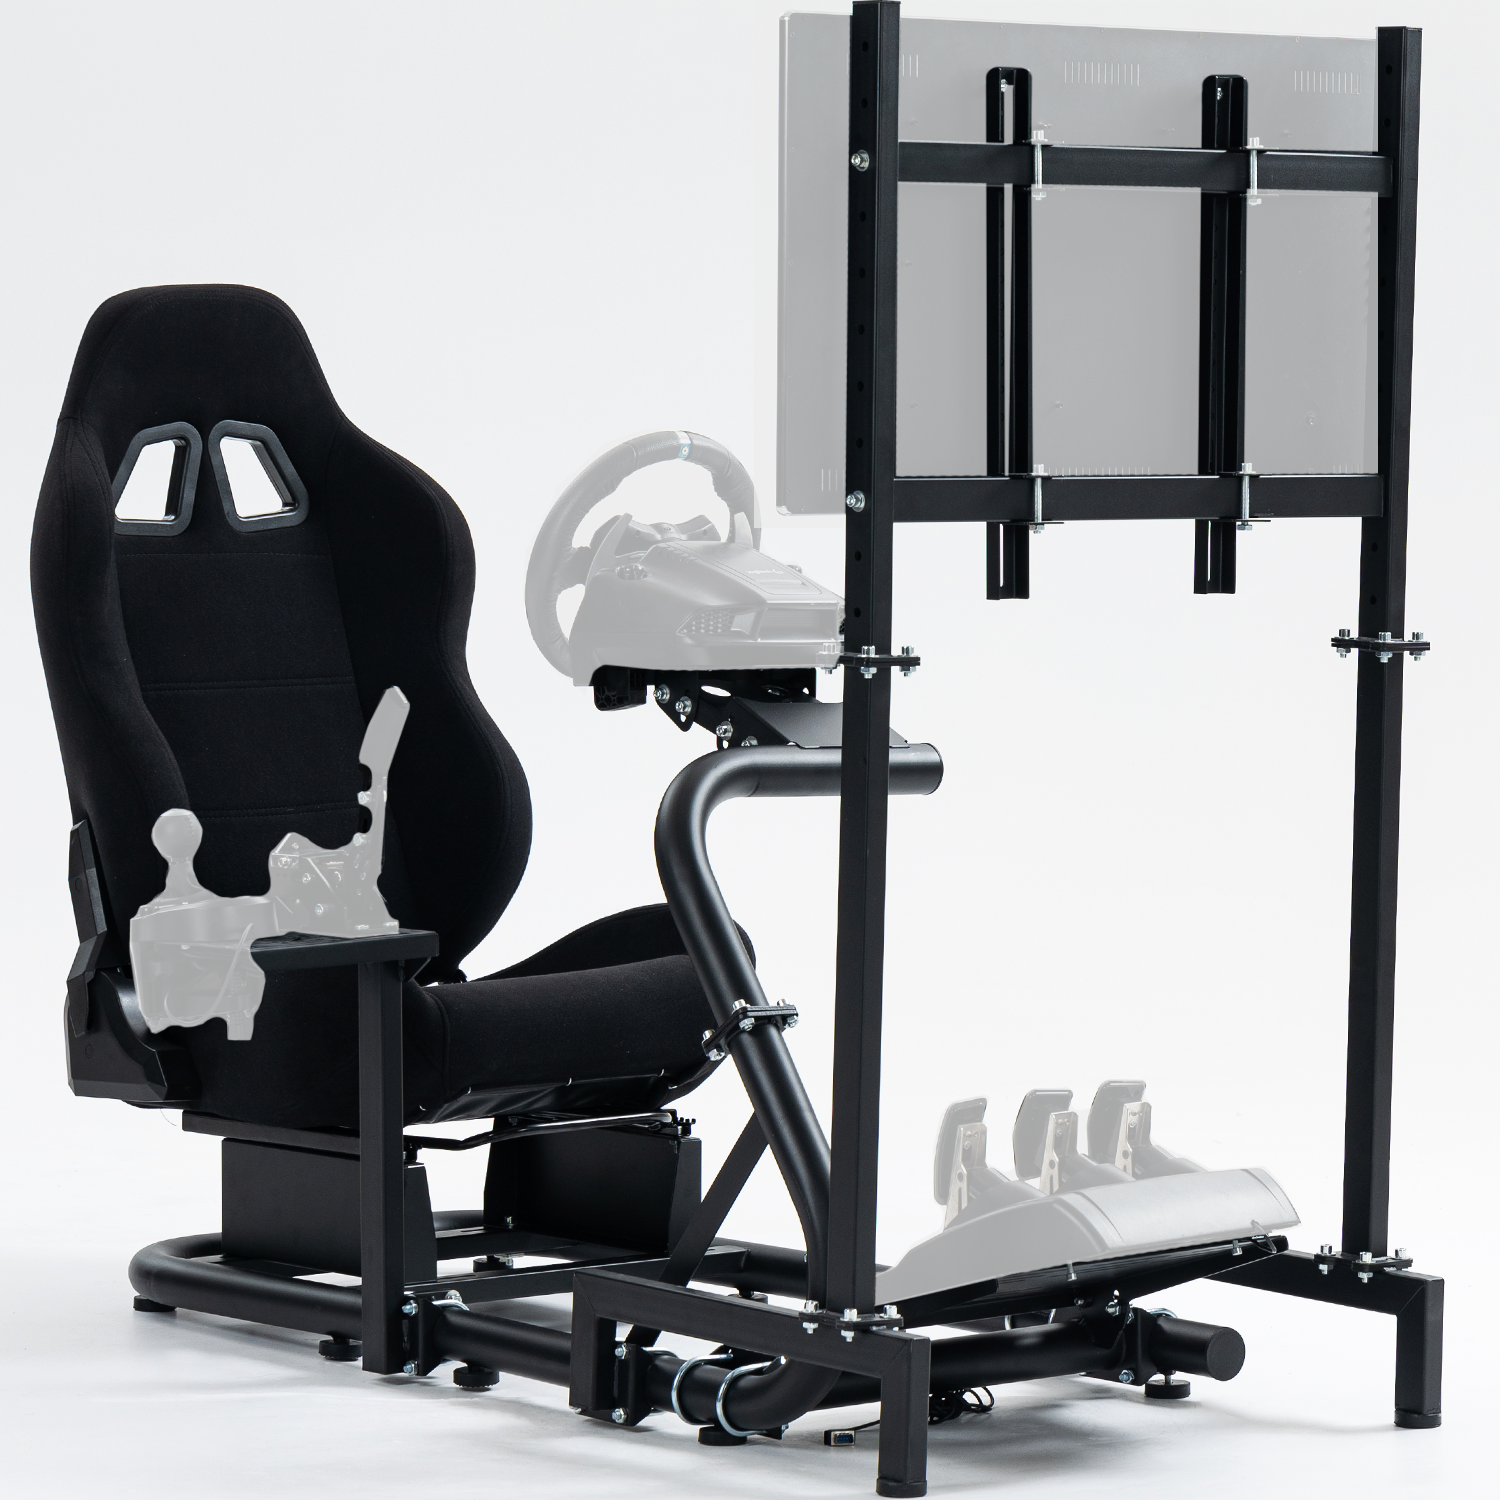 Minneer Comfortable Racing Simulator Cockpit with Seat TV Stand Fit Logitech Fanatec